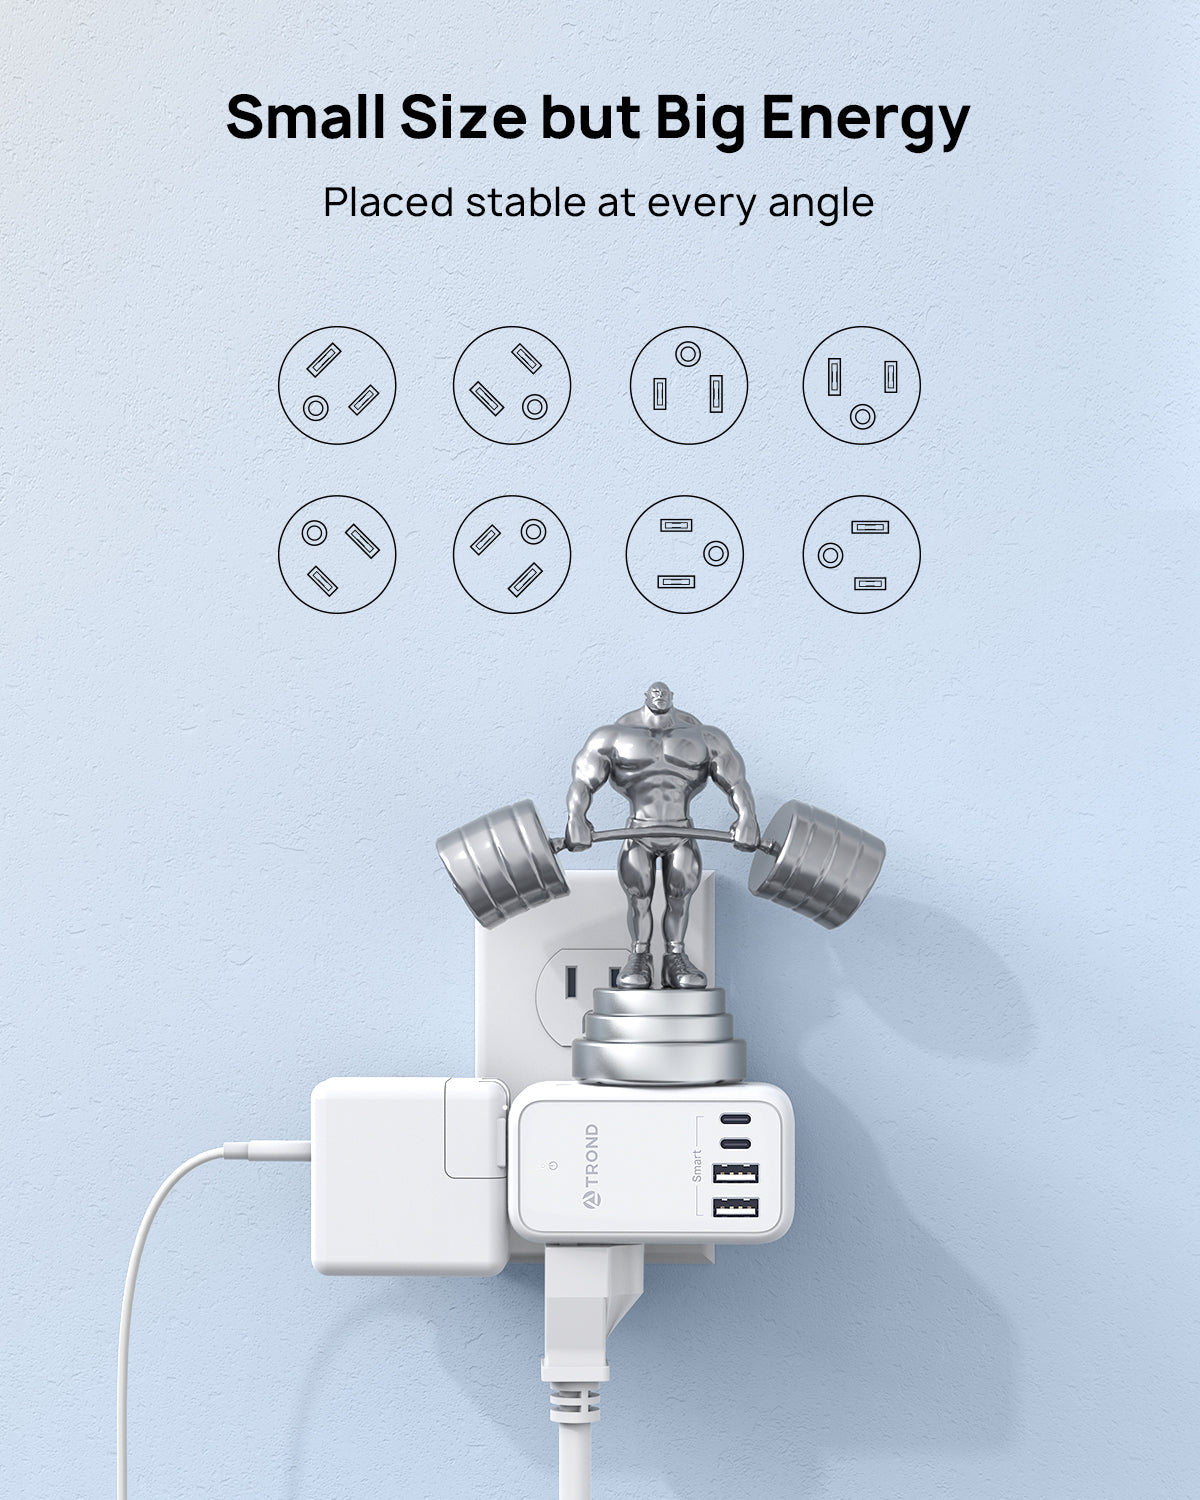 TROND Multi Plug Wall Outlet - Outlet Extender with 360° Rotating Plug, 3 AC Outlet Splitter